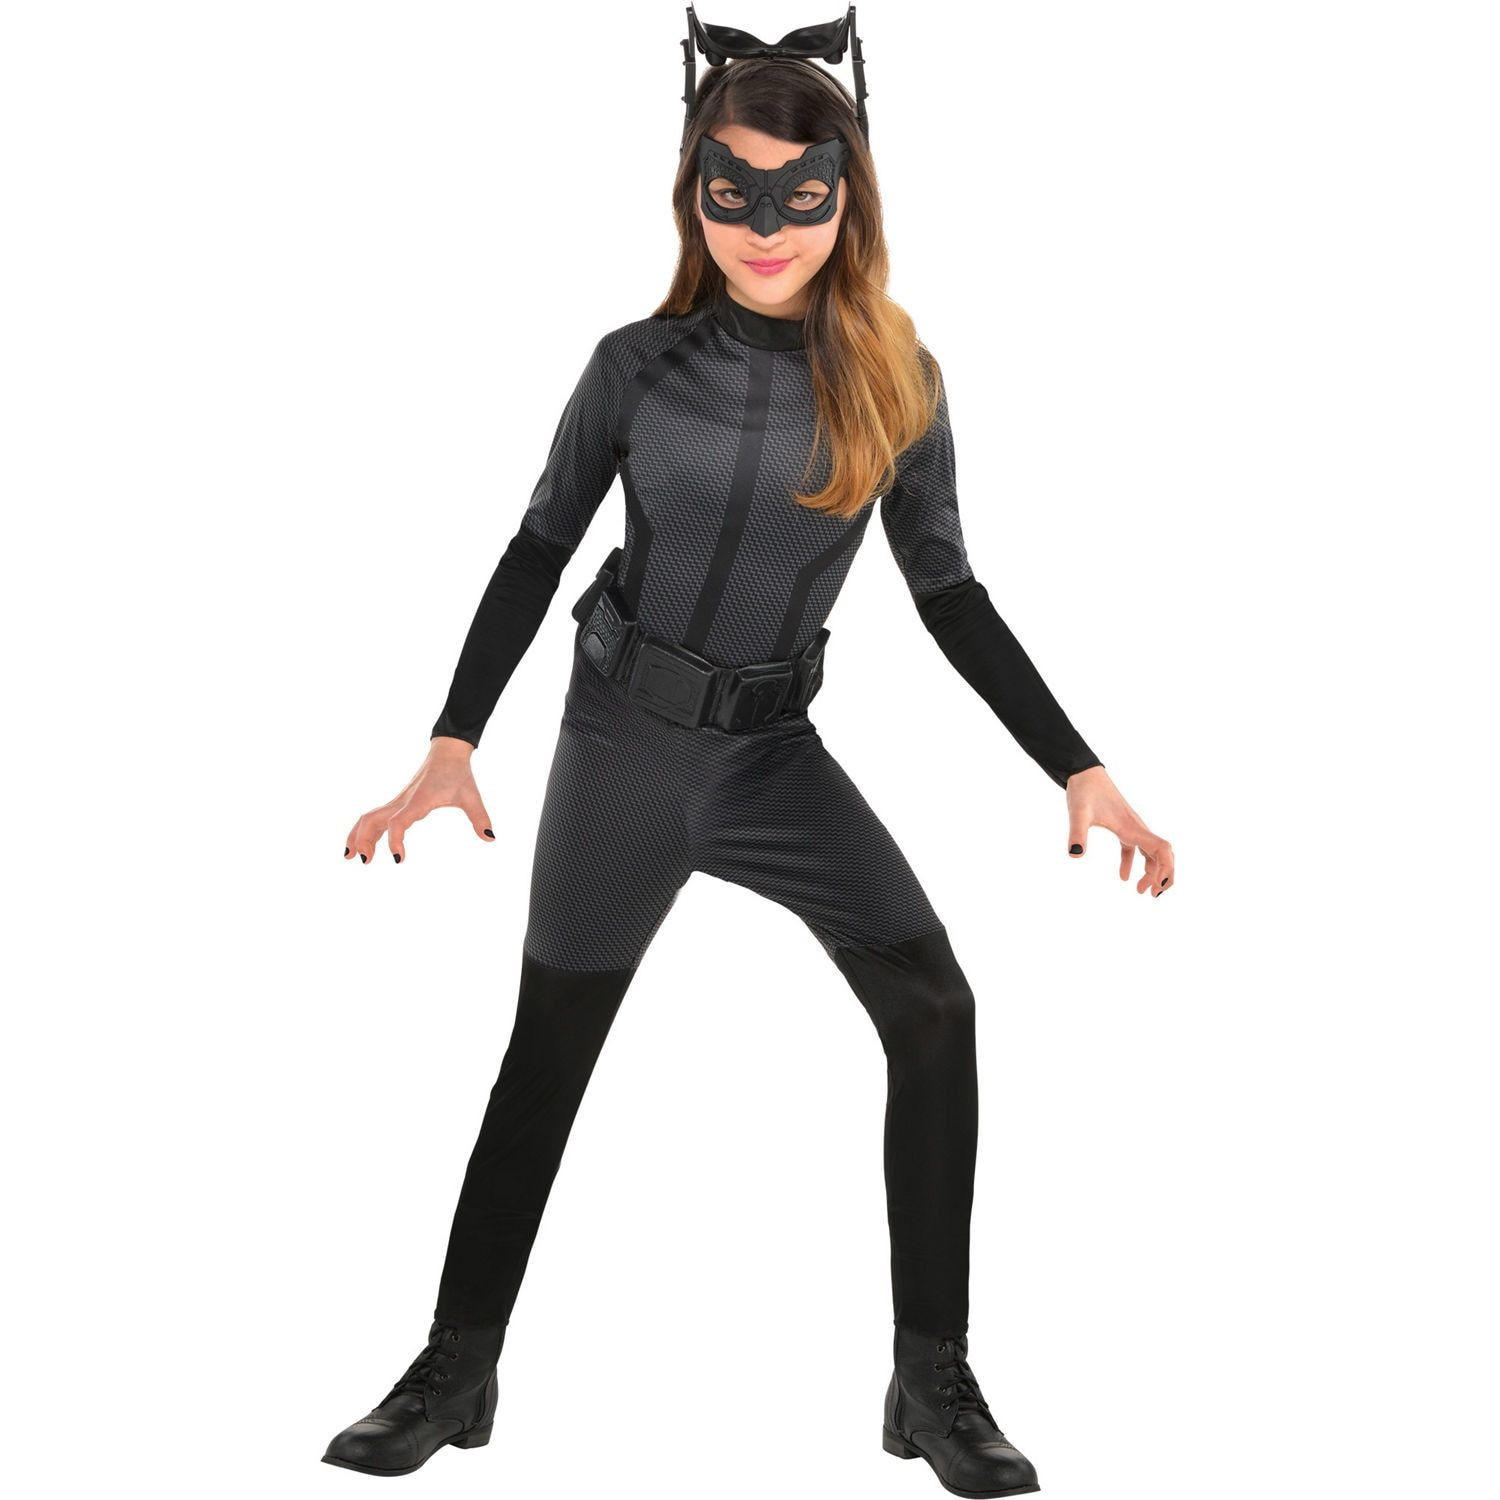 Catwoman Costume For Kids Party City
 Girls Black Catwoman Costume The Dark Knight Rises